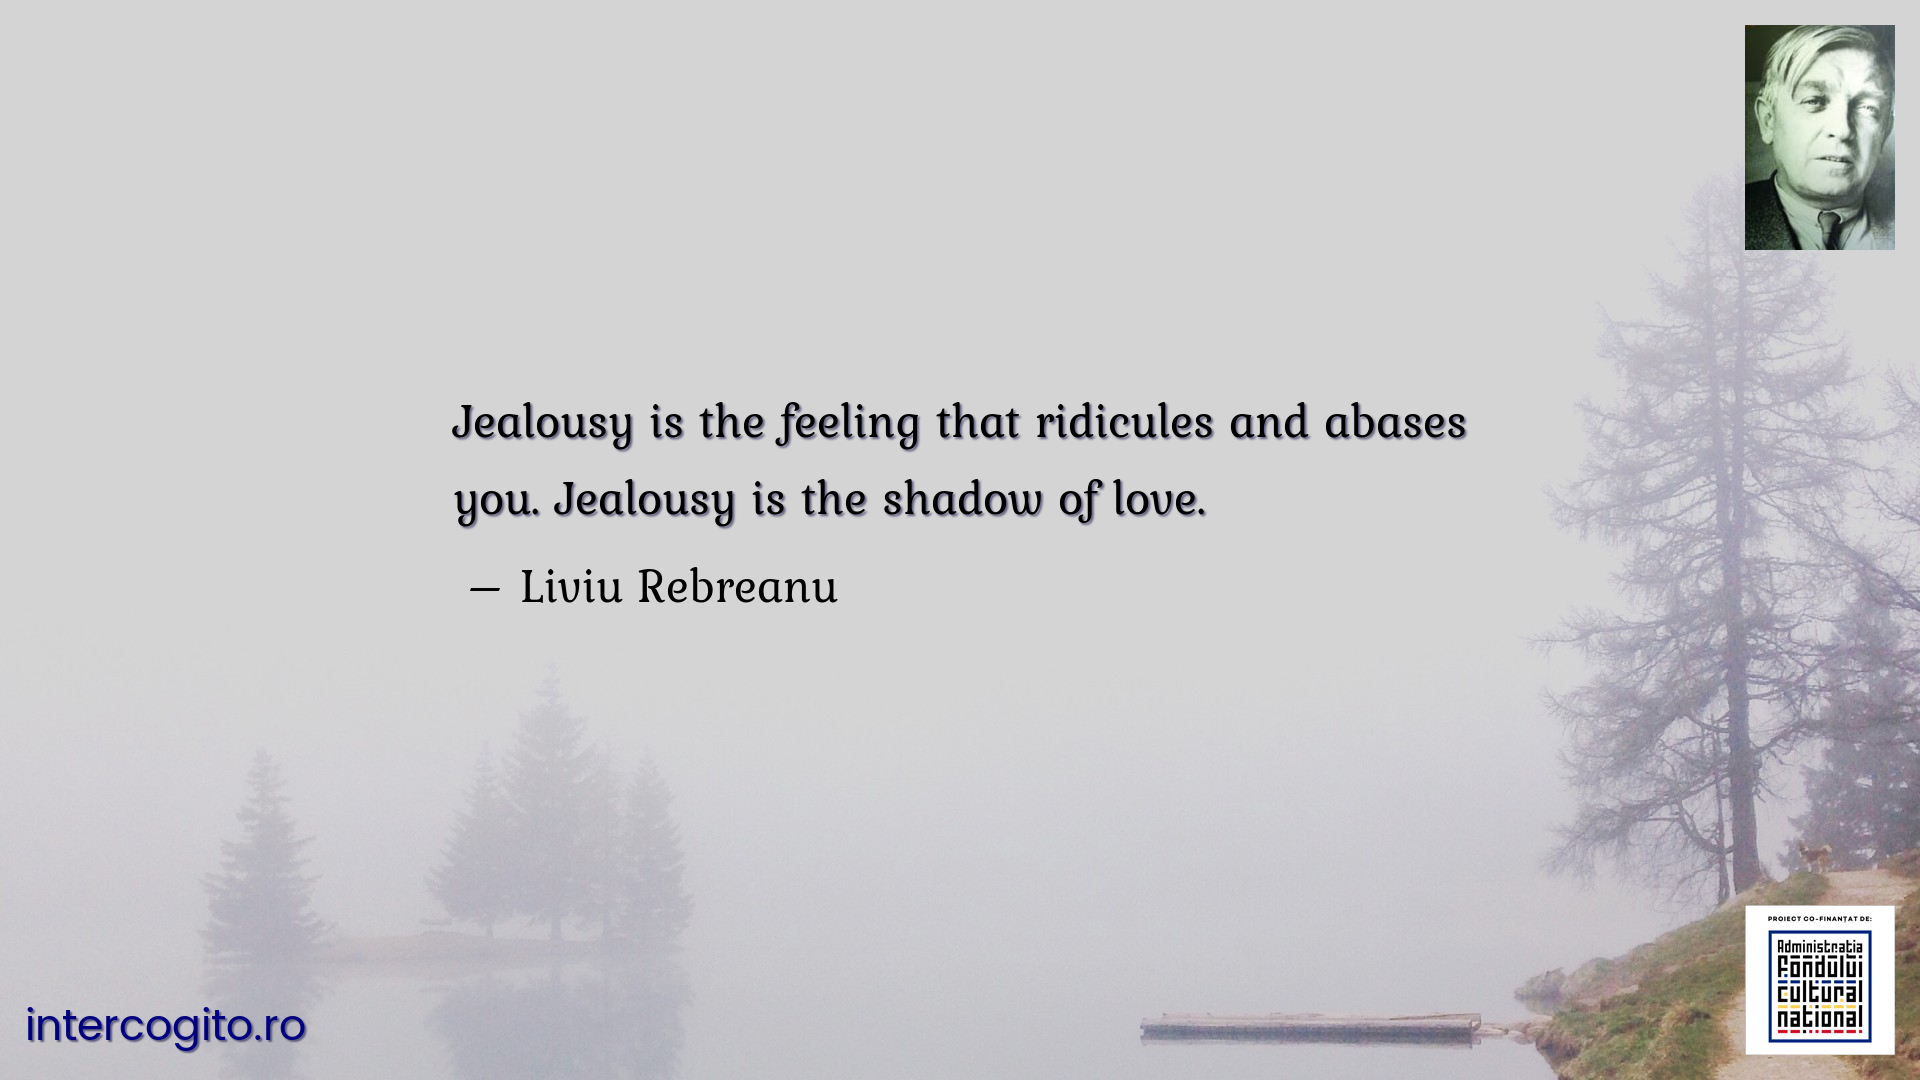 Jealousy is the feeling that ridicules and abases you. Jealousy is the shadow of love.